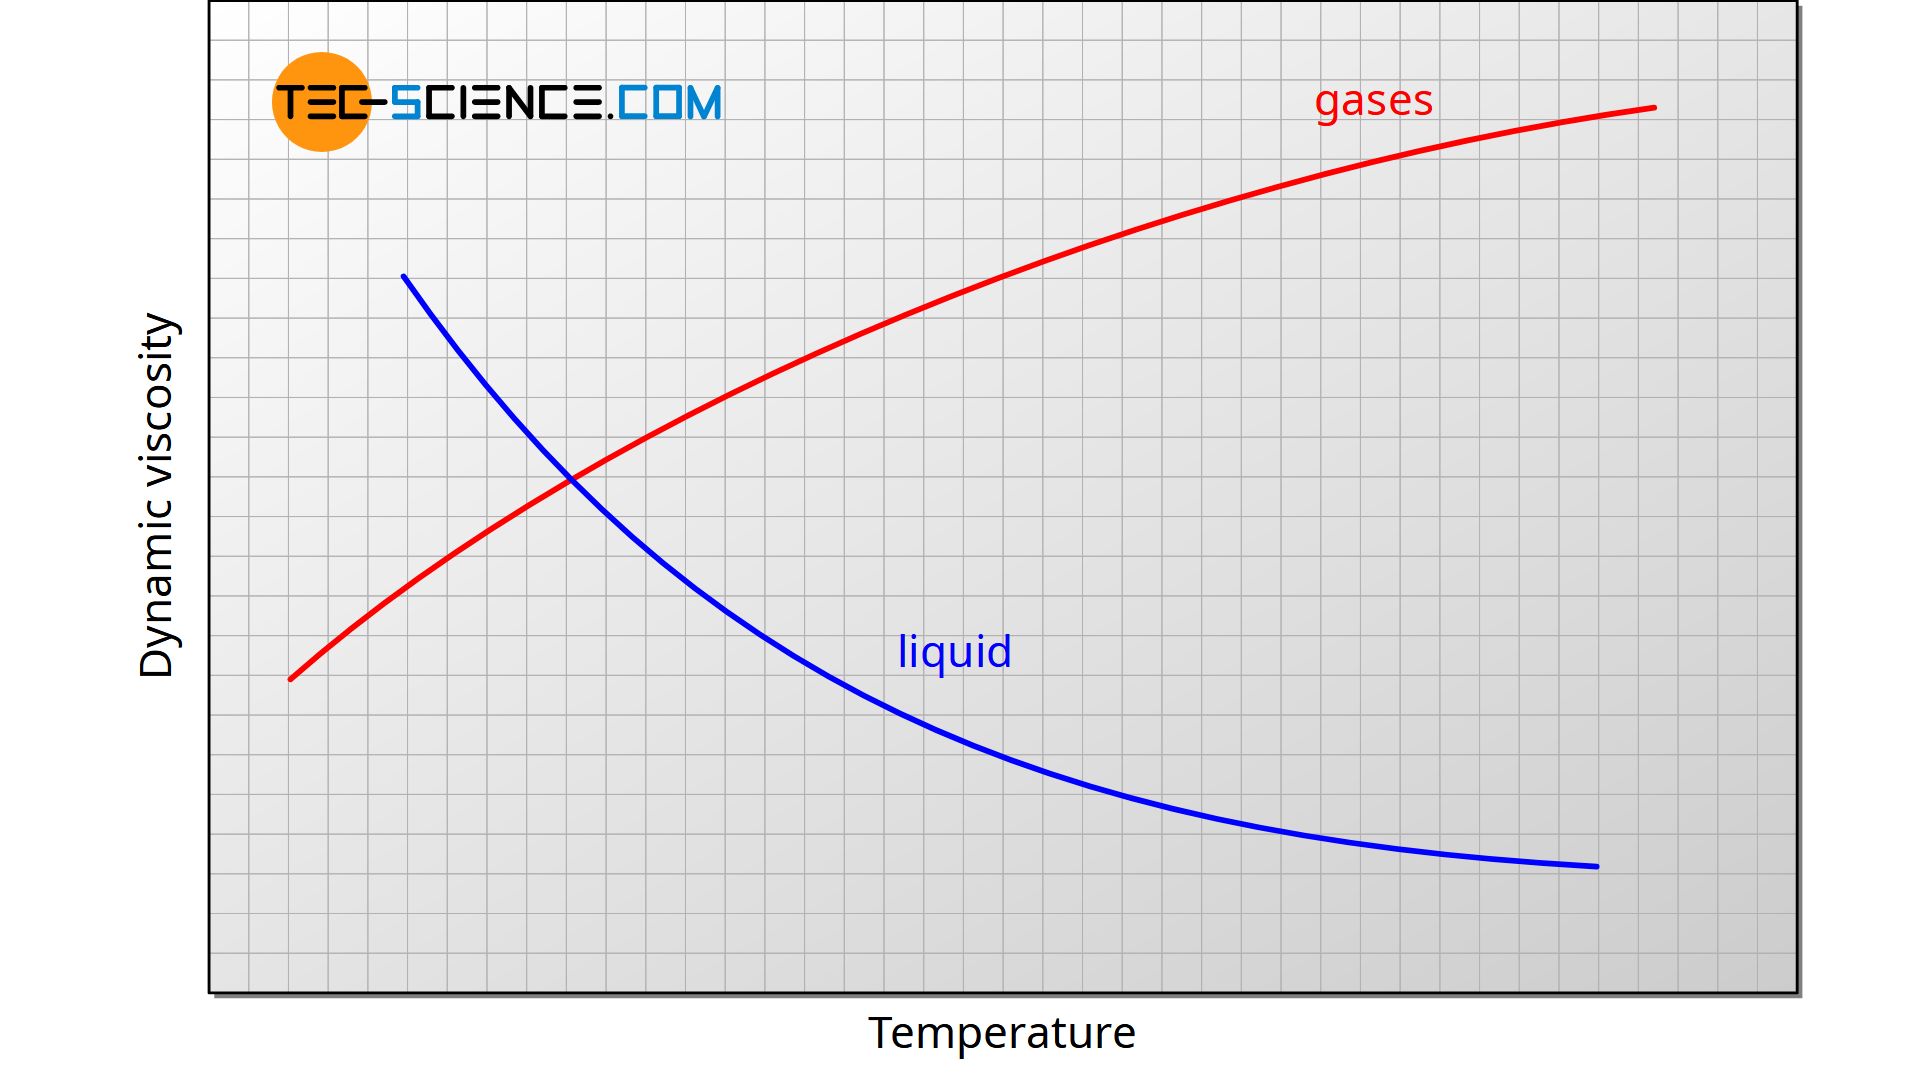 dynamic viscosity of air at 25 degrees celsius and 1 atm